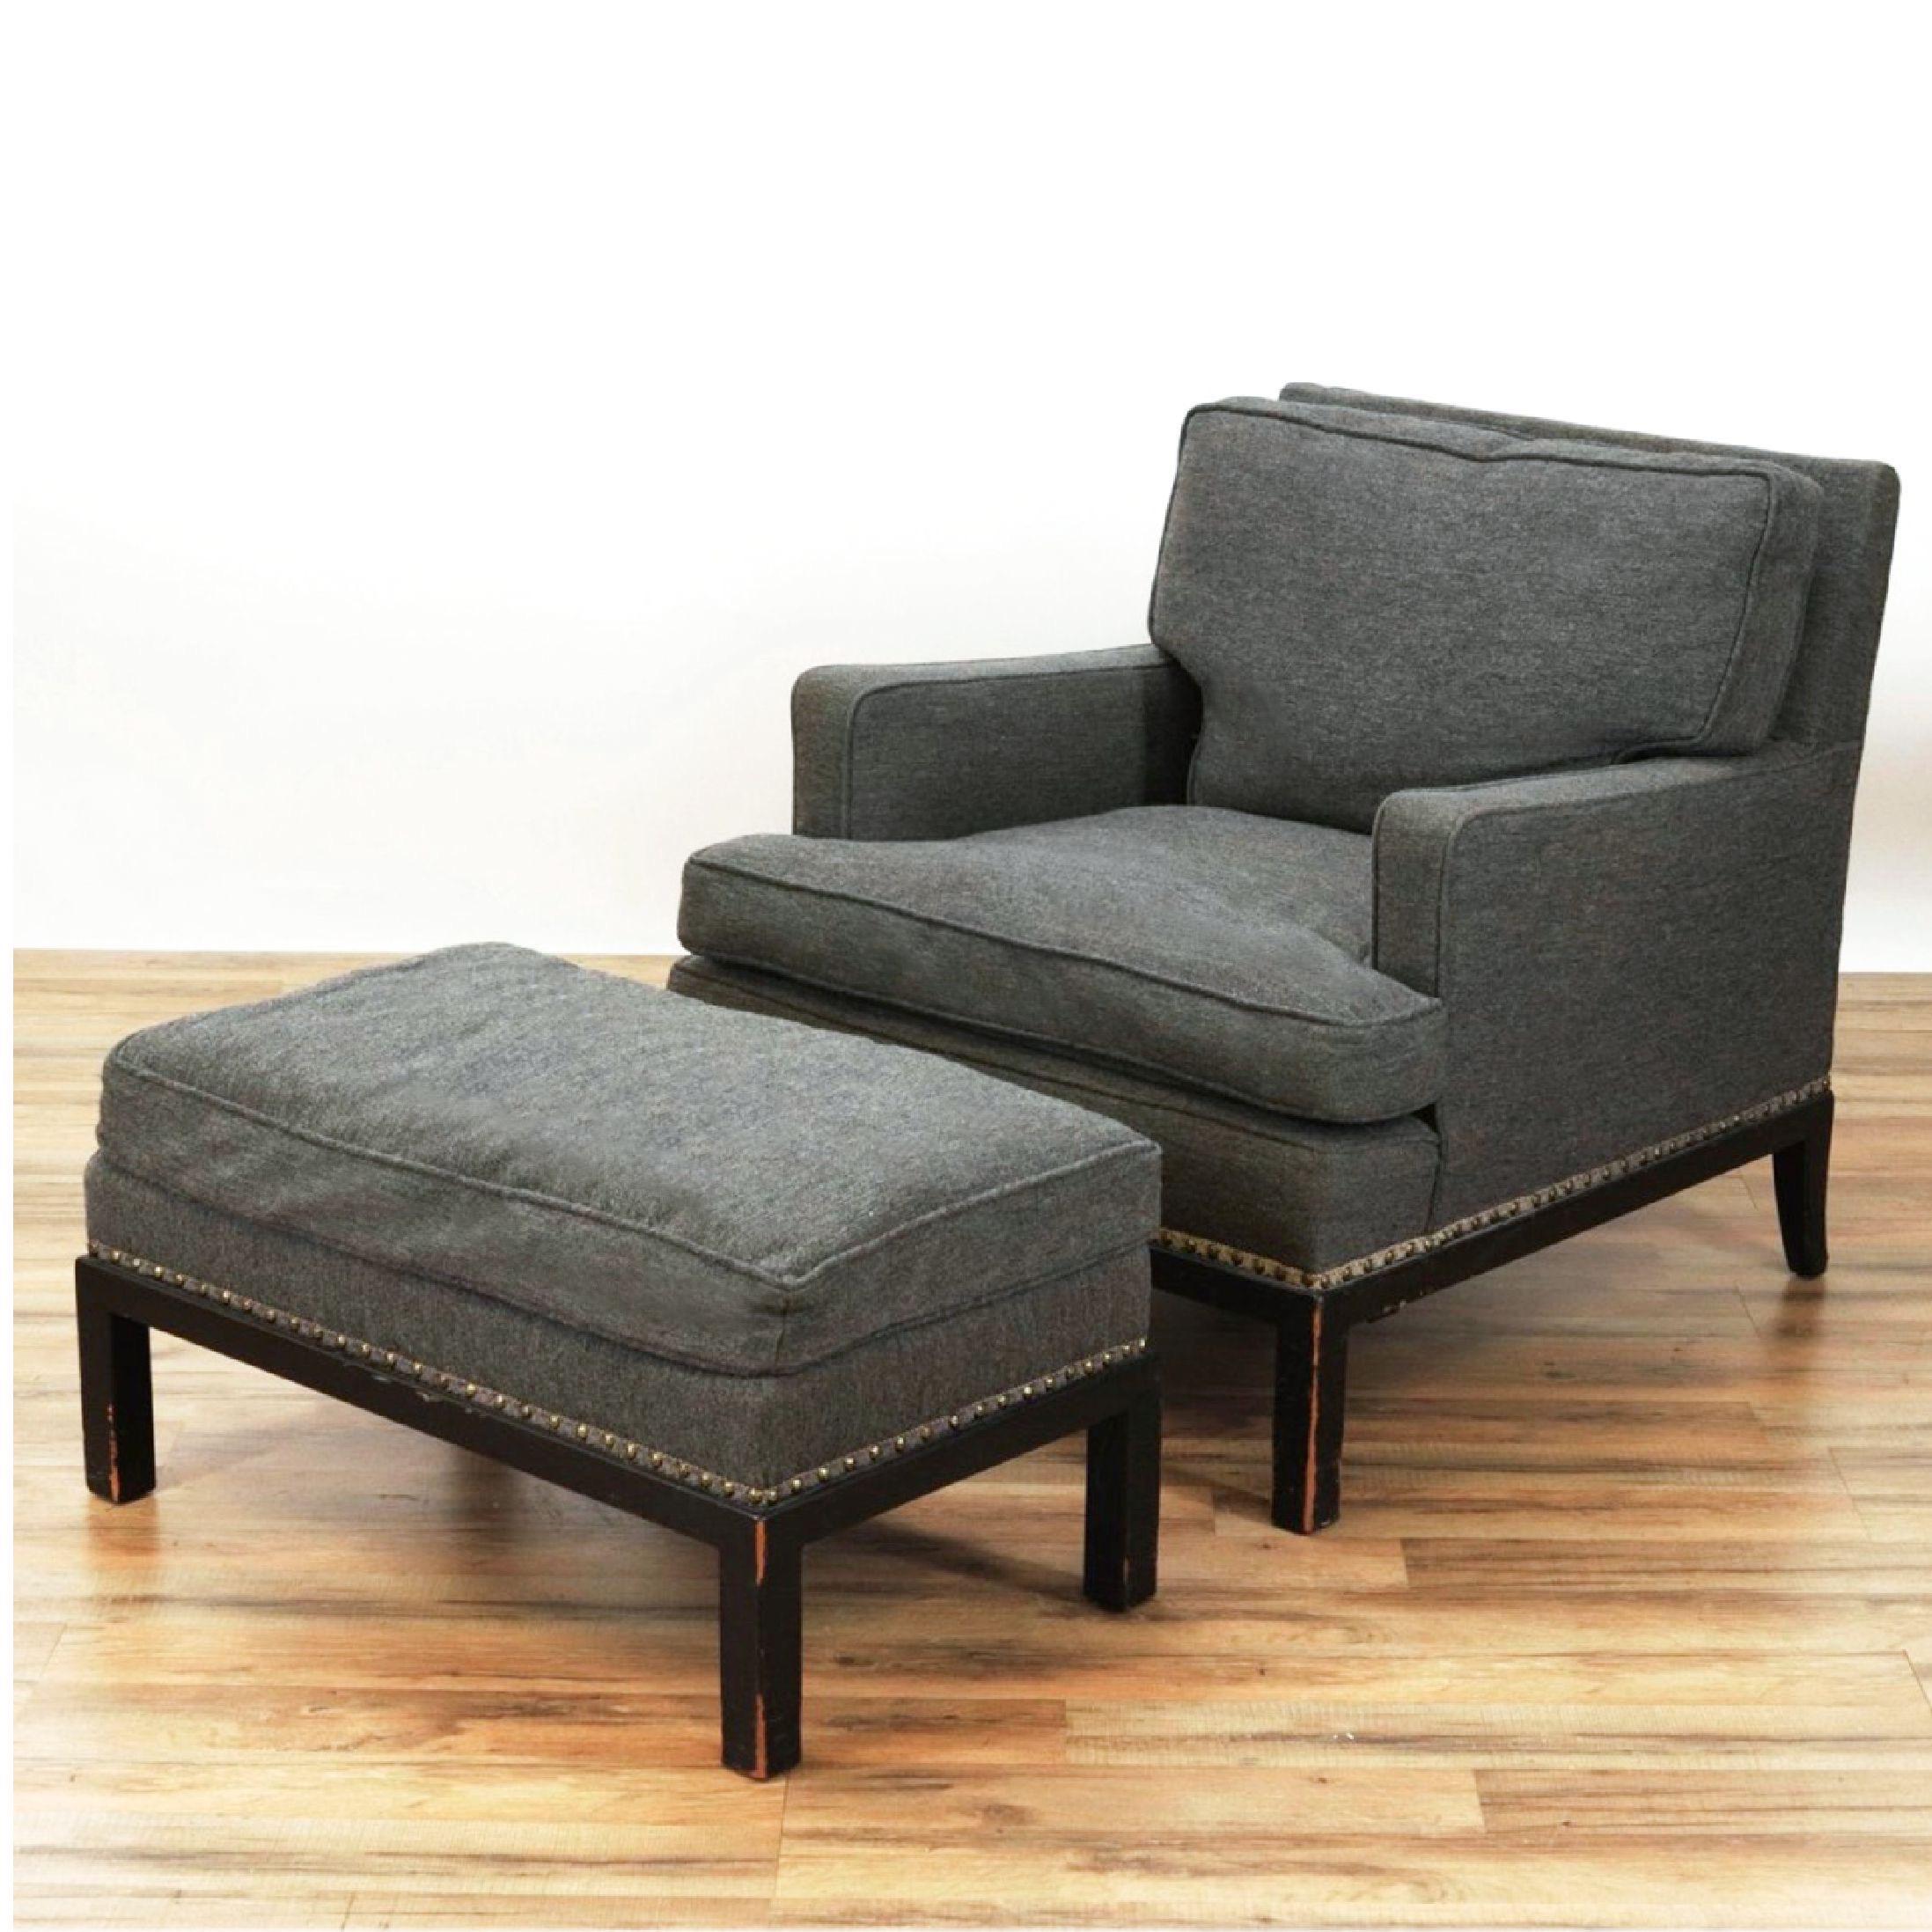 Tommi Parzinger lounge chair and ottoman, ebonized frame, charcoal grey upholstery. Copy of the original purchased receipt included from Parzinger Originals Inc., dated January 15, 1958
 Dimensions: 27